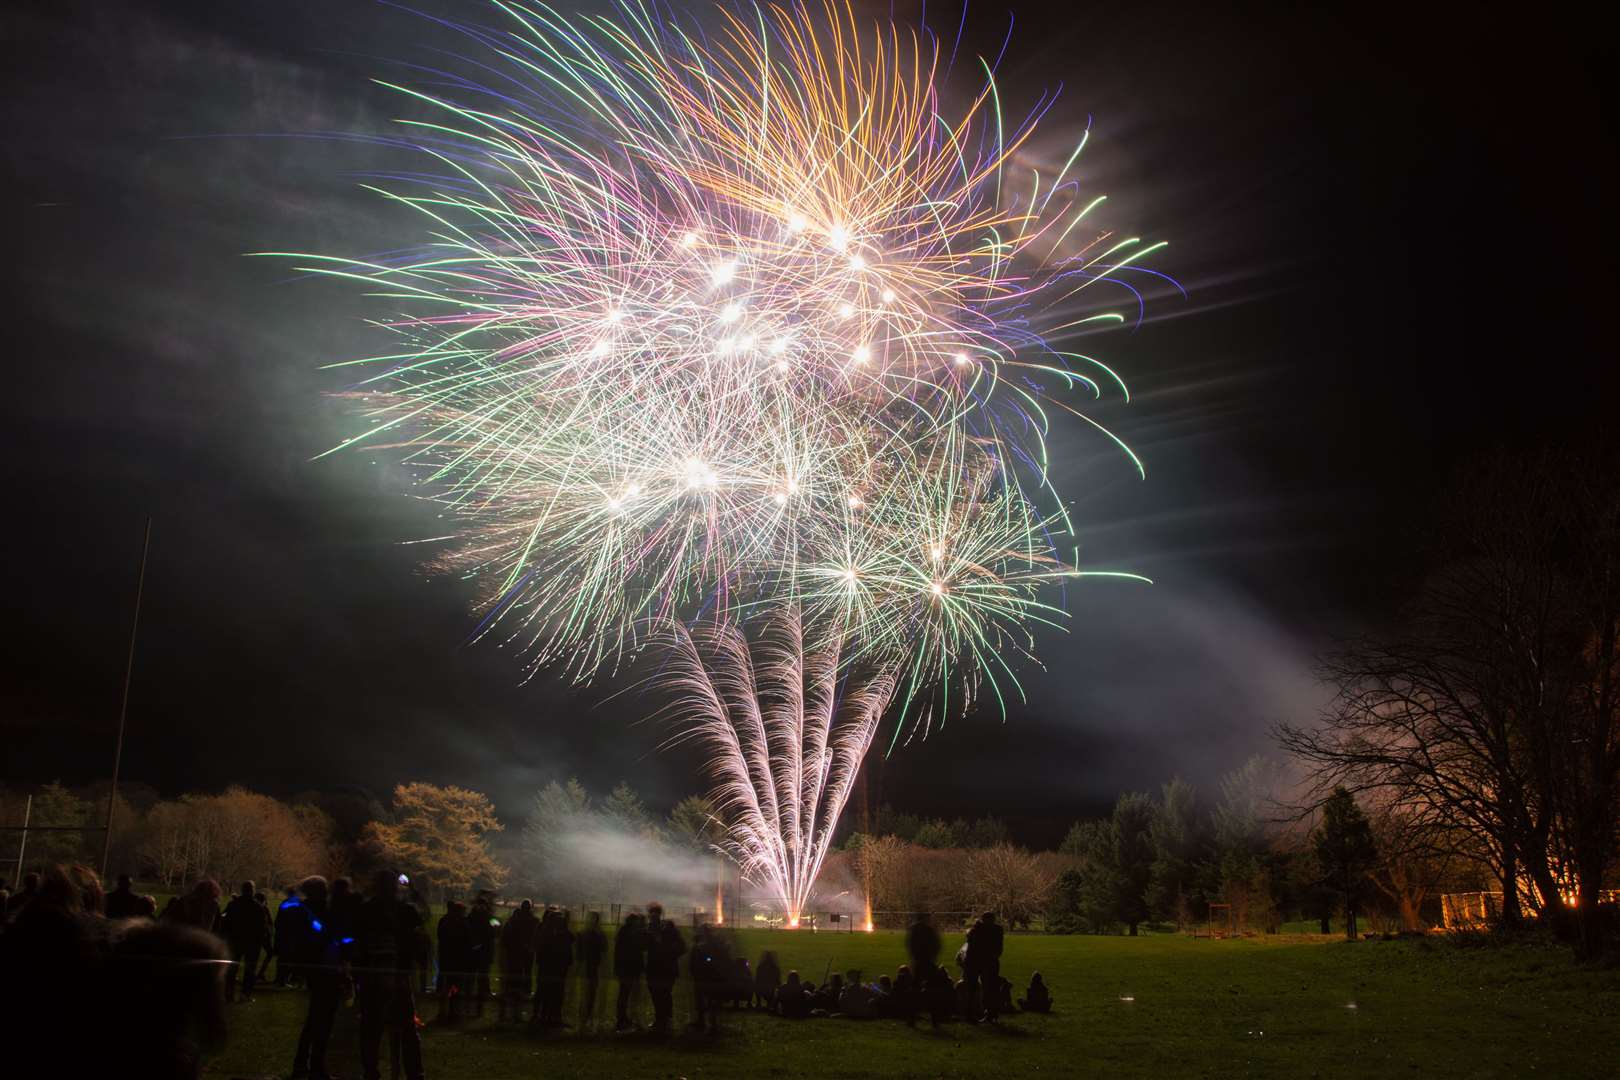 This year's Banff Fireworks Display and Bonfire has been cancelled.